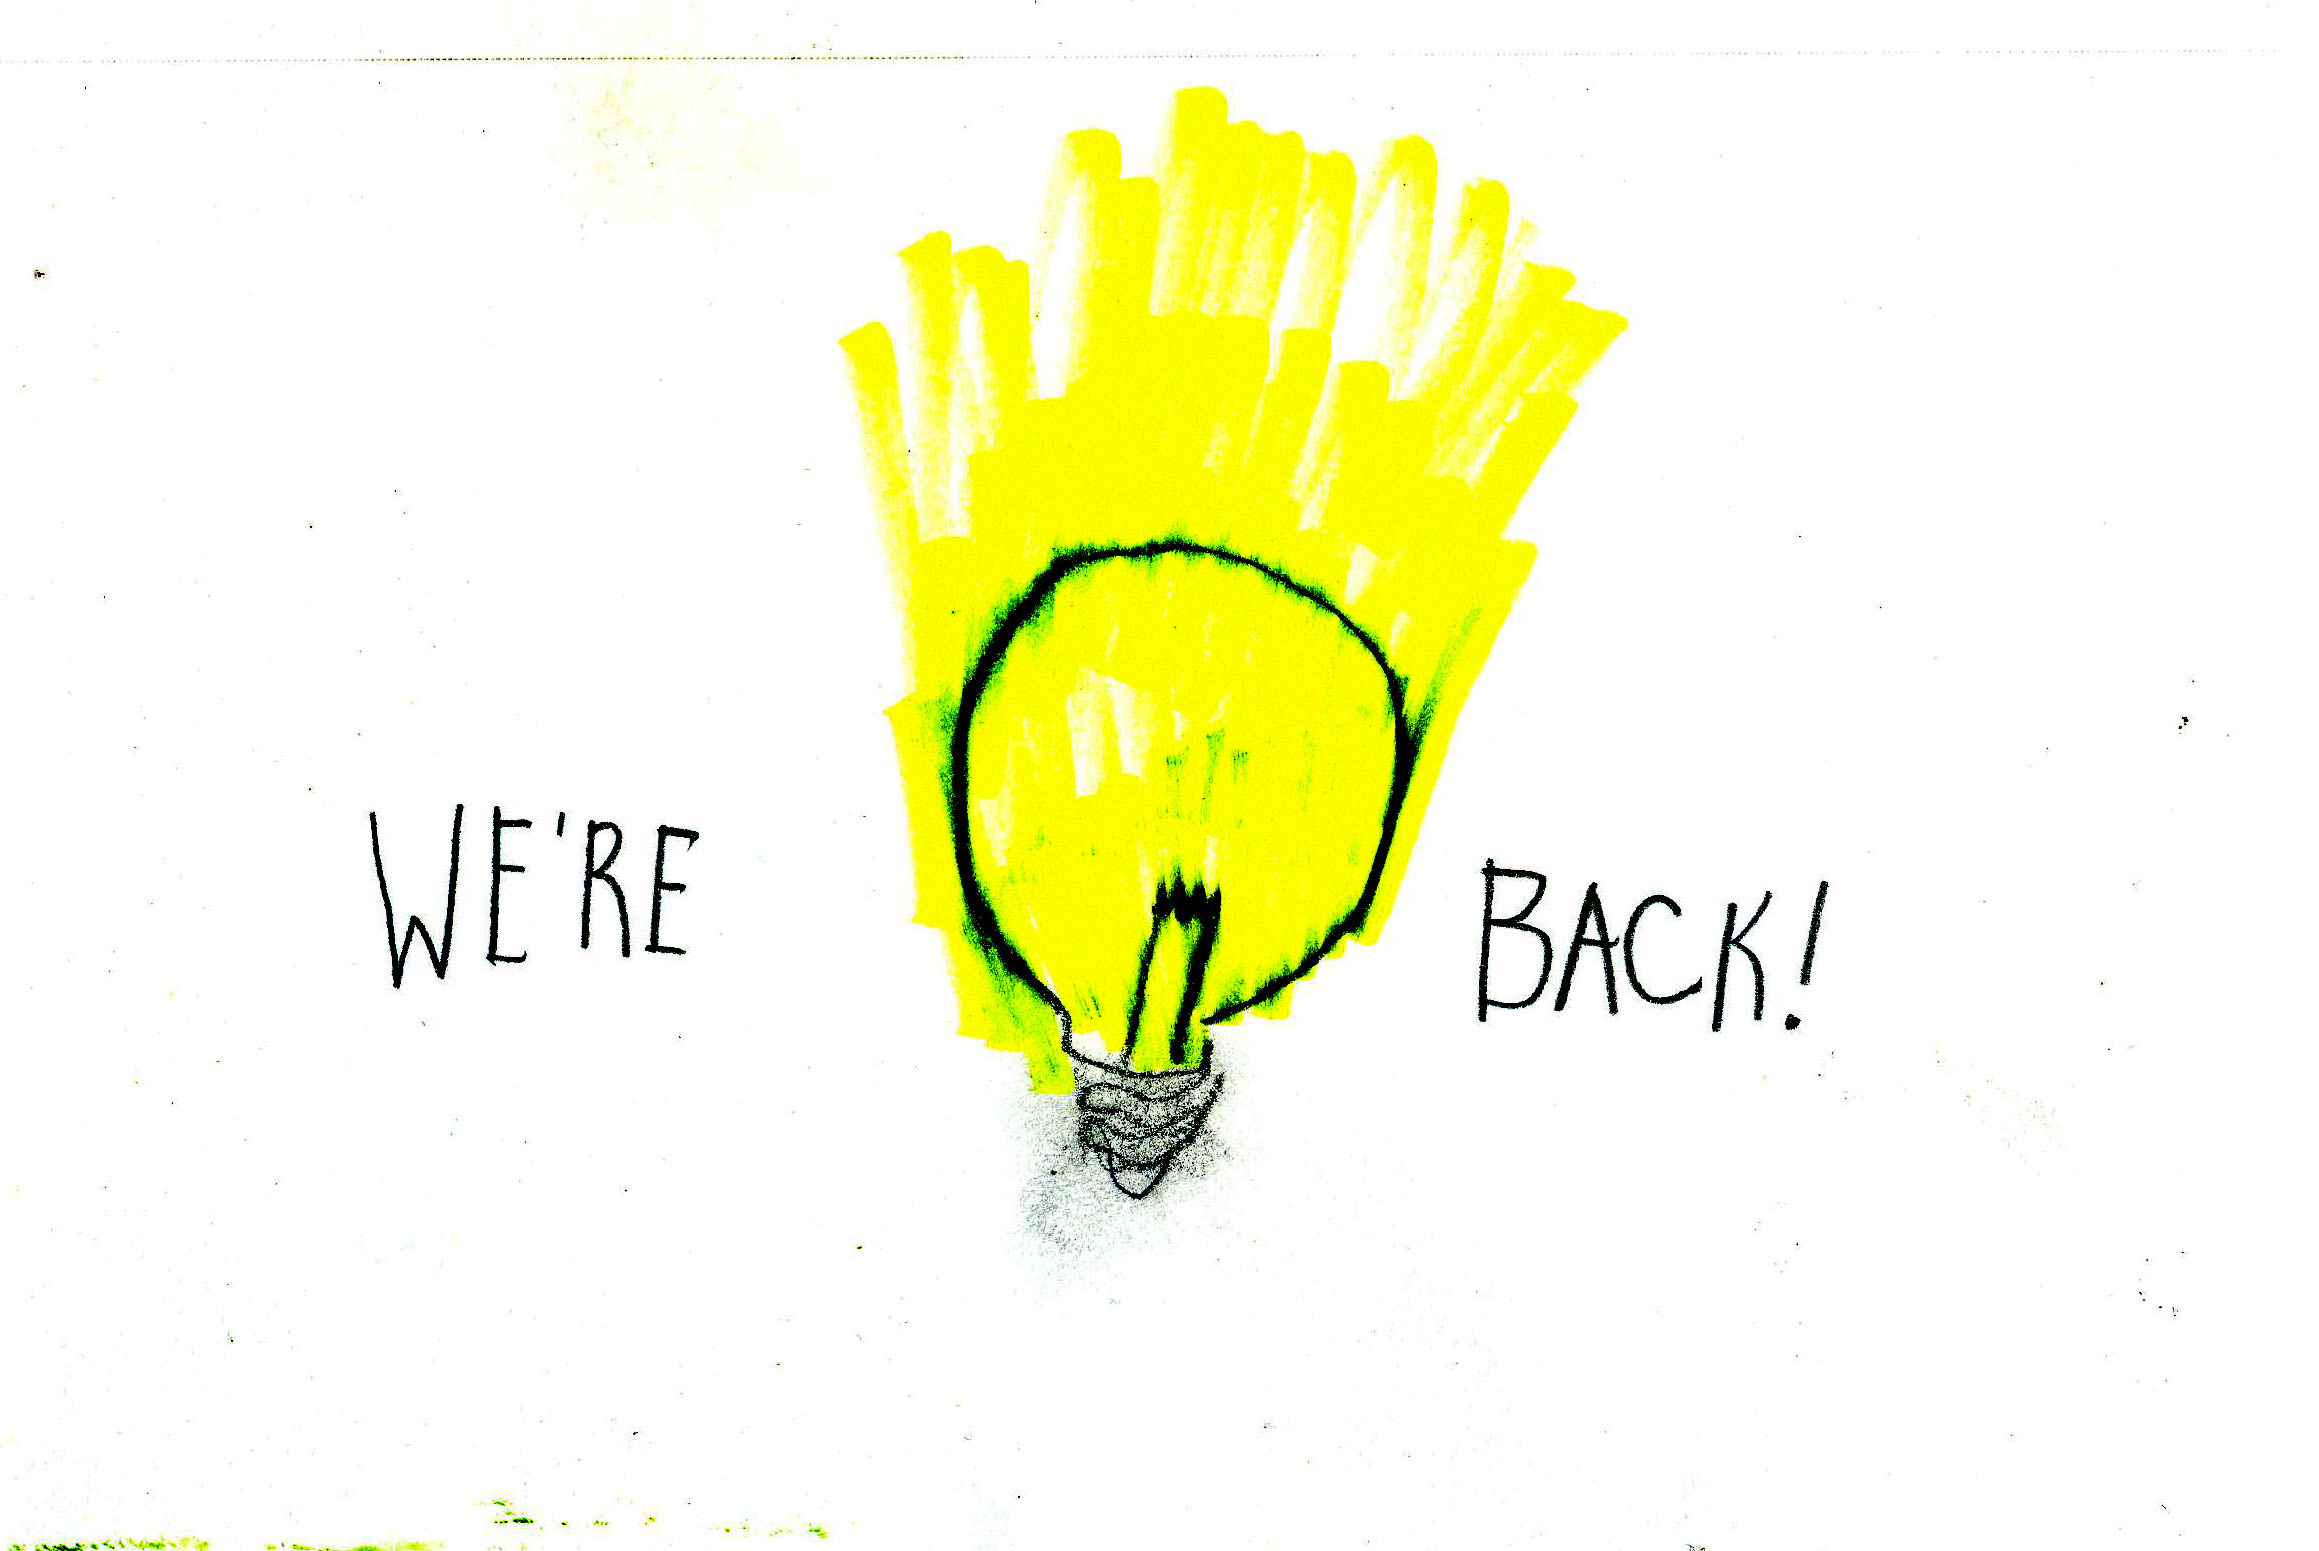 A hand-drawn photo of a lightbulb that is overflowing with yellow light, with "We're Back!" written on either side.